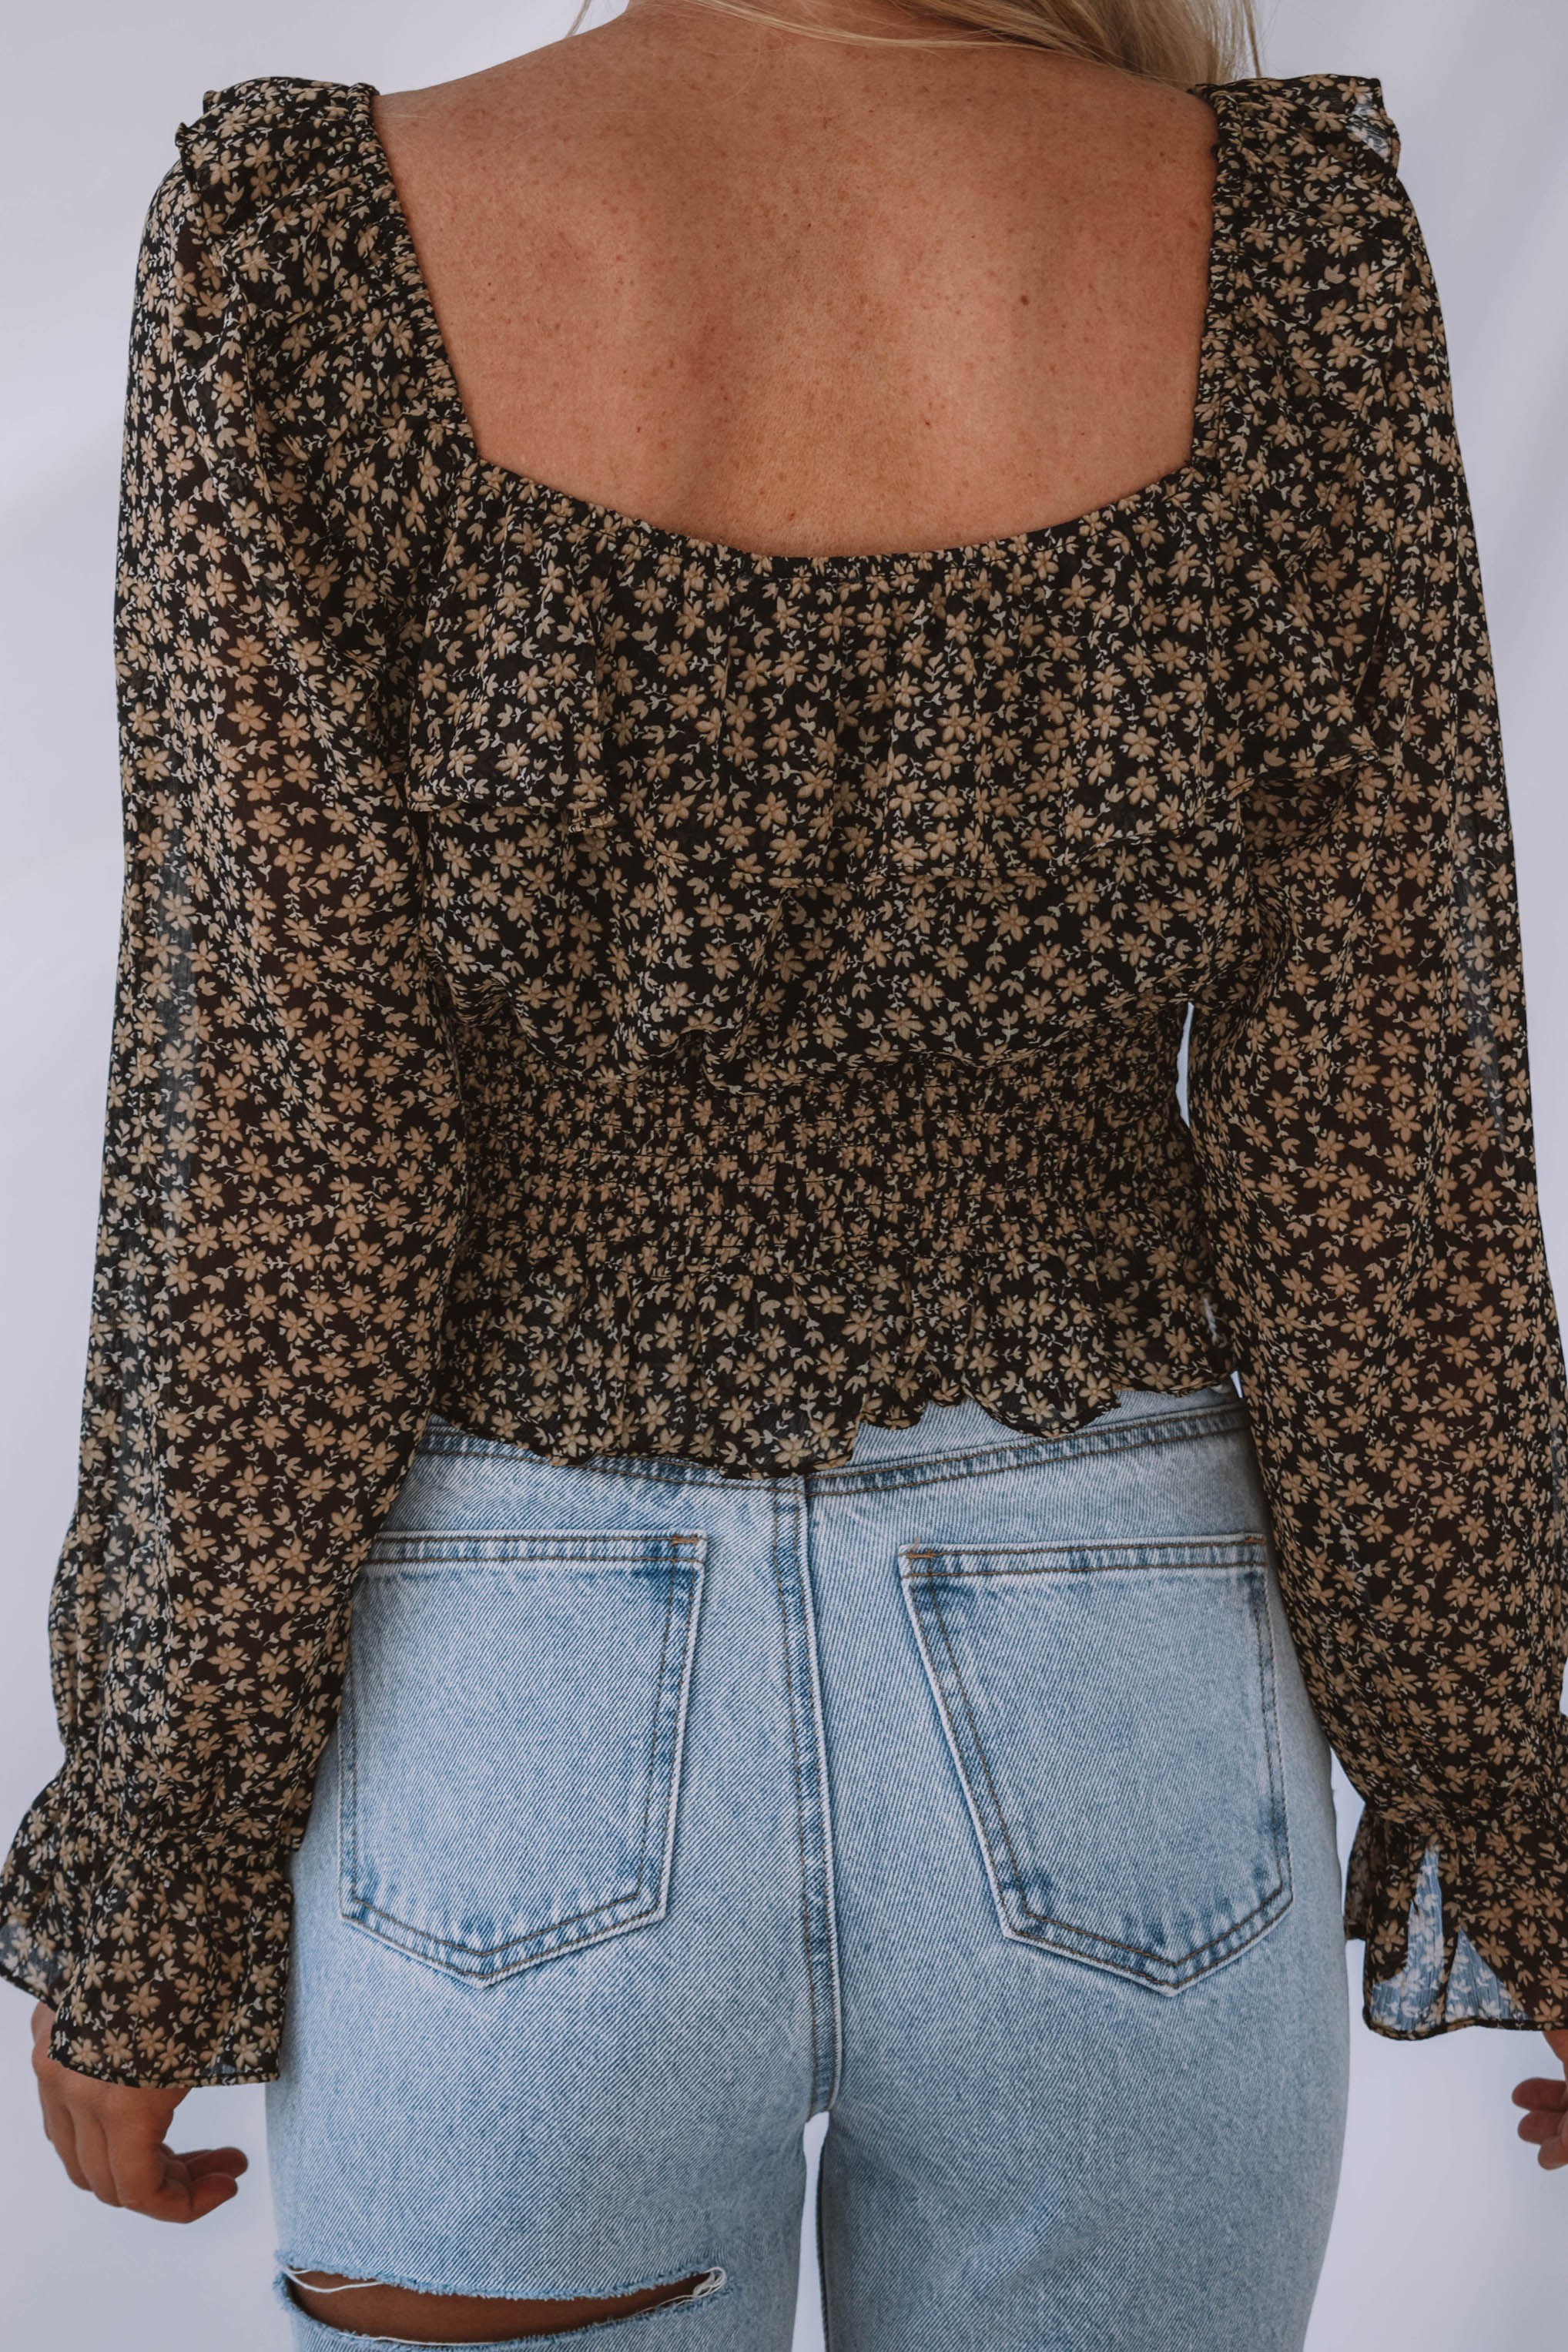 Rosemary Floral Square Neck Ruffle Blouse